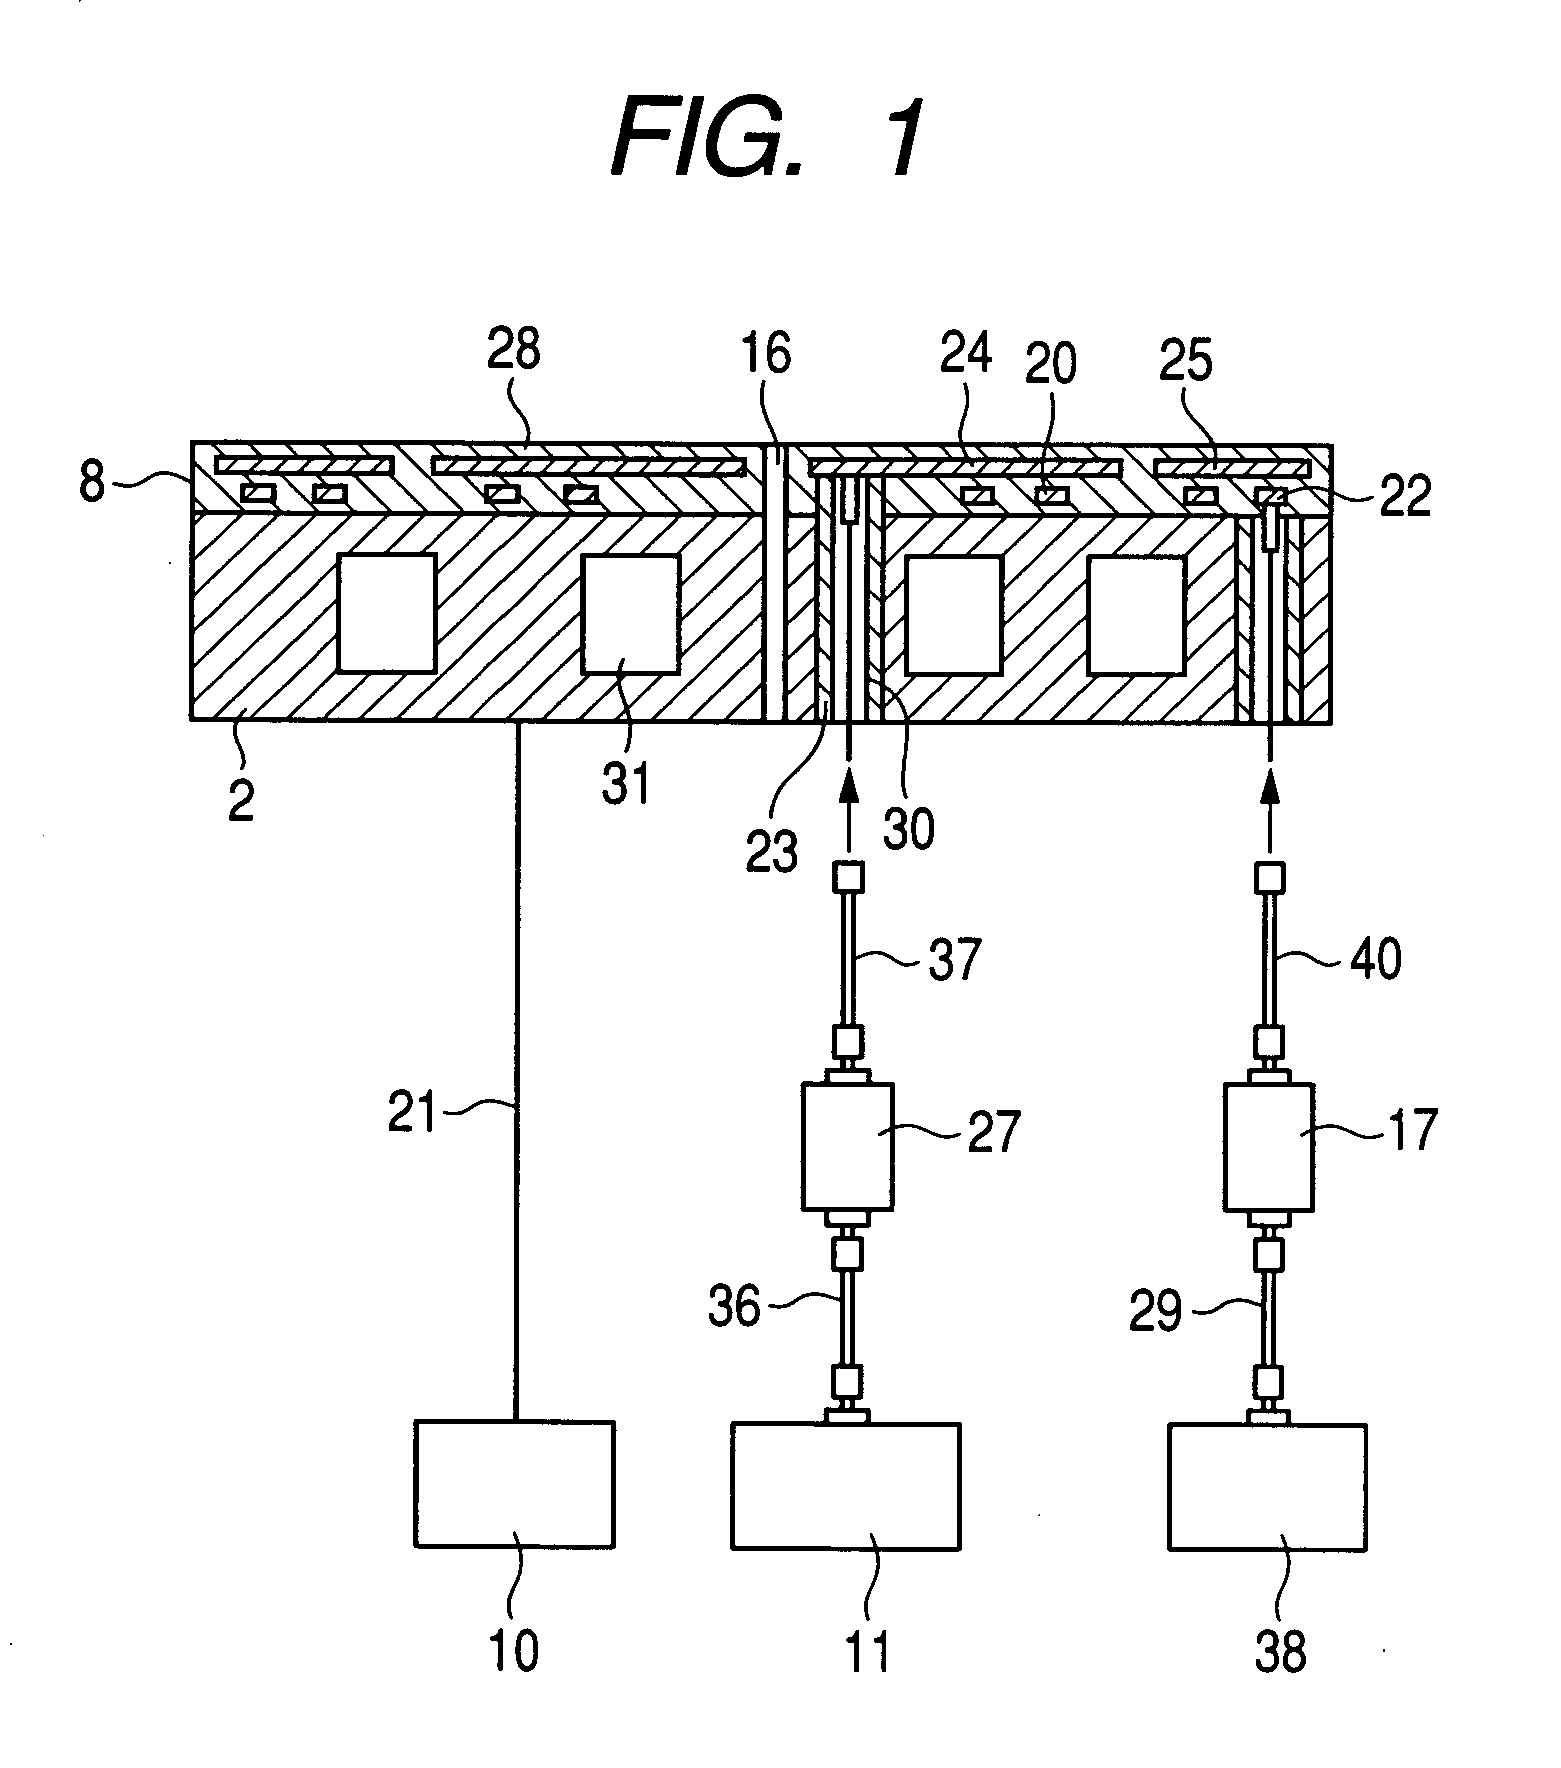 Plasma processing apparatus including electrostatic chuck with built-in heater